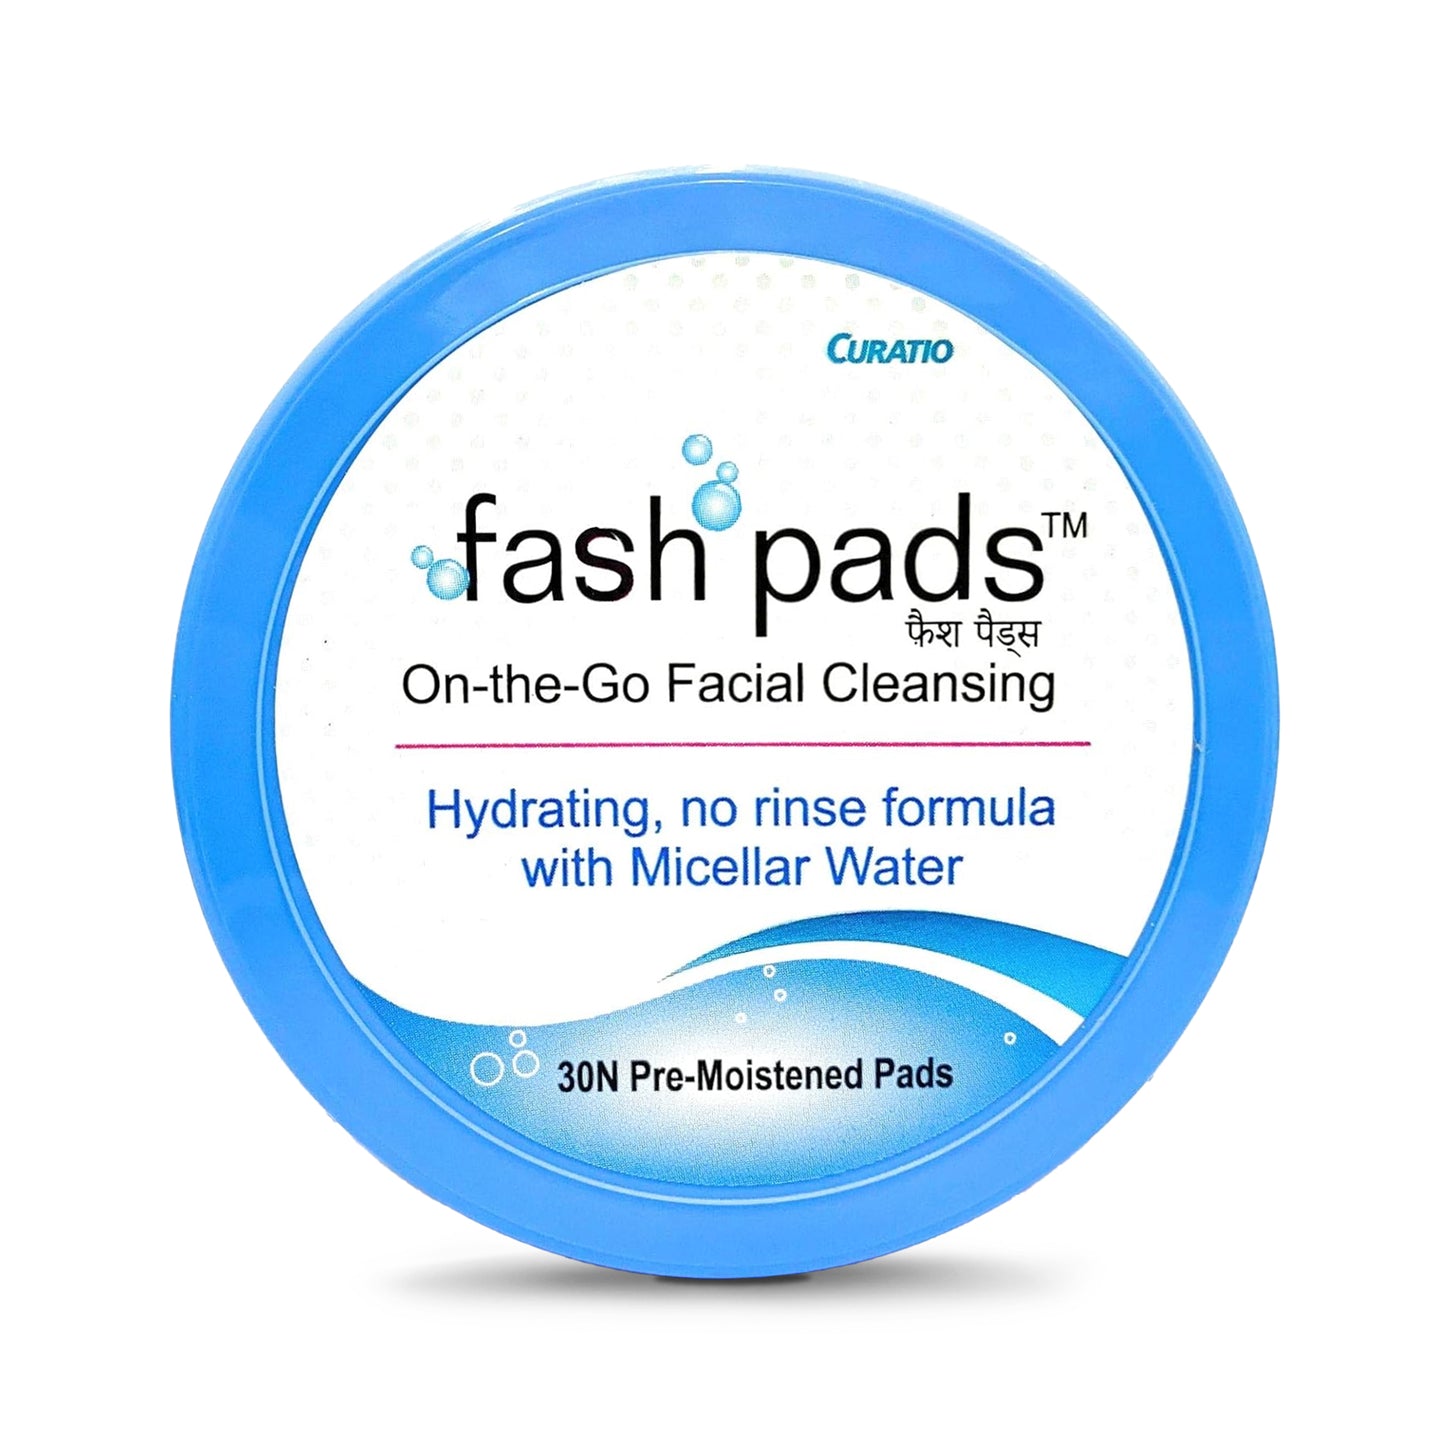 Fash pads on the Go Facial Cleansing, 30 Pads